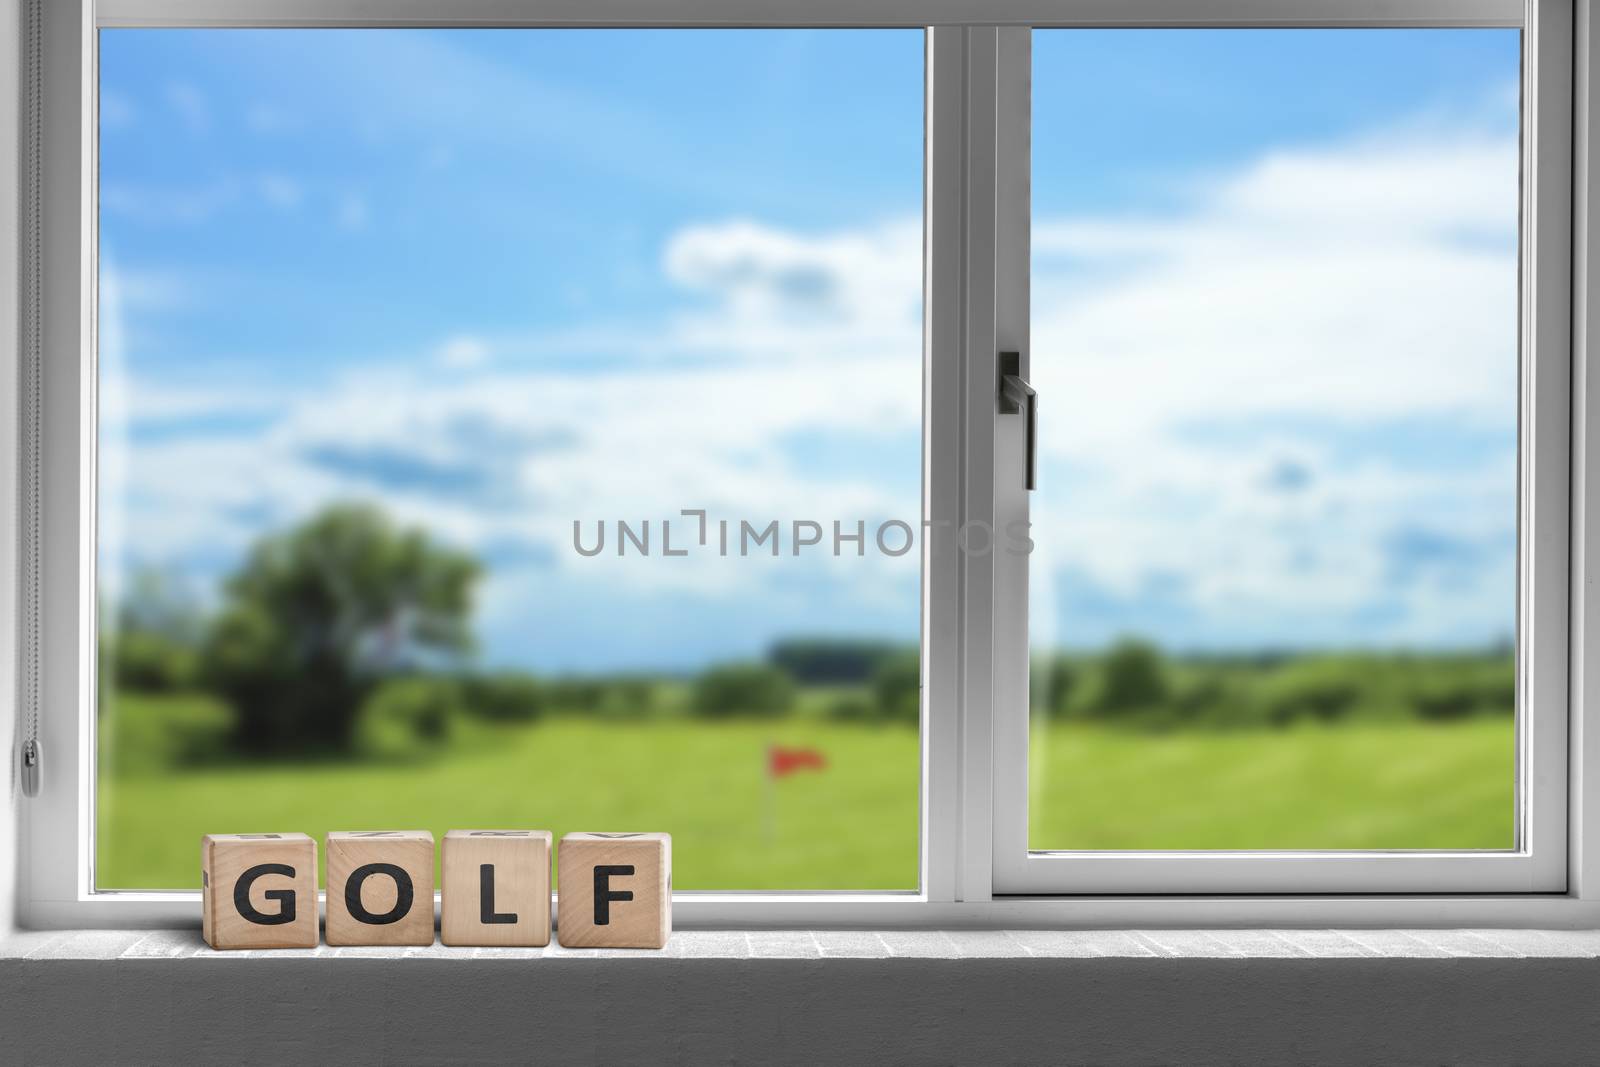 Golf sign in a window with a view to a golf course in bright daylight